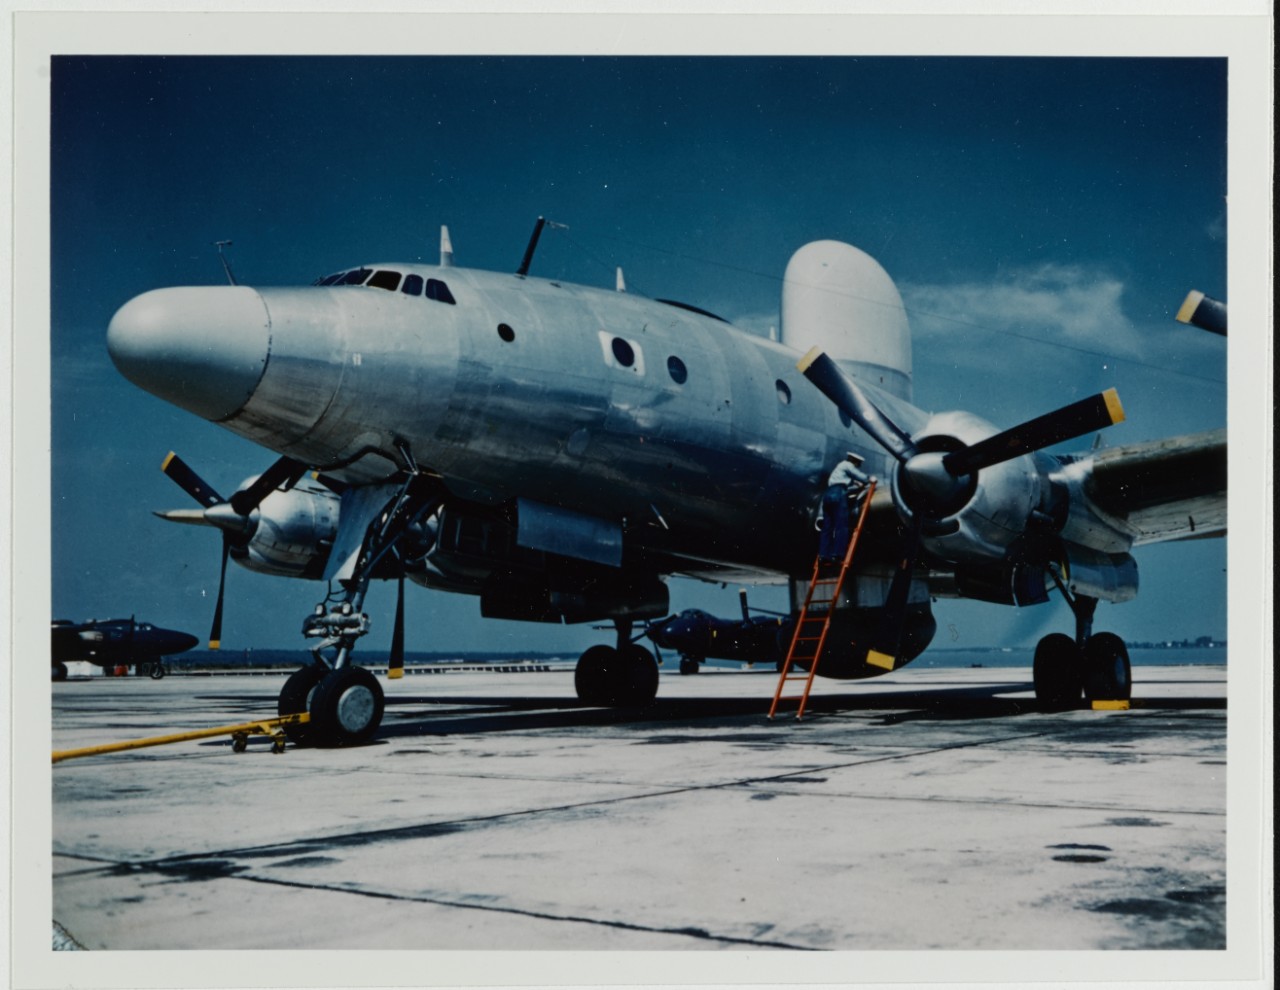 Lockheed PO-1W at Naval Air Test Center, Patuxent River, Maryland, circa 1950s